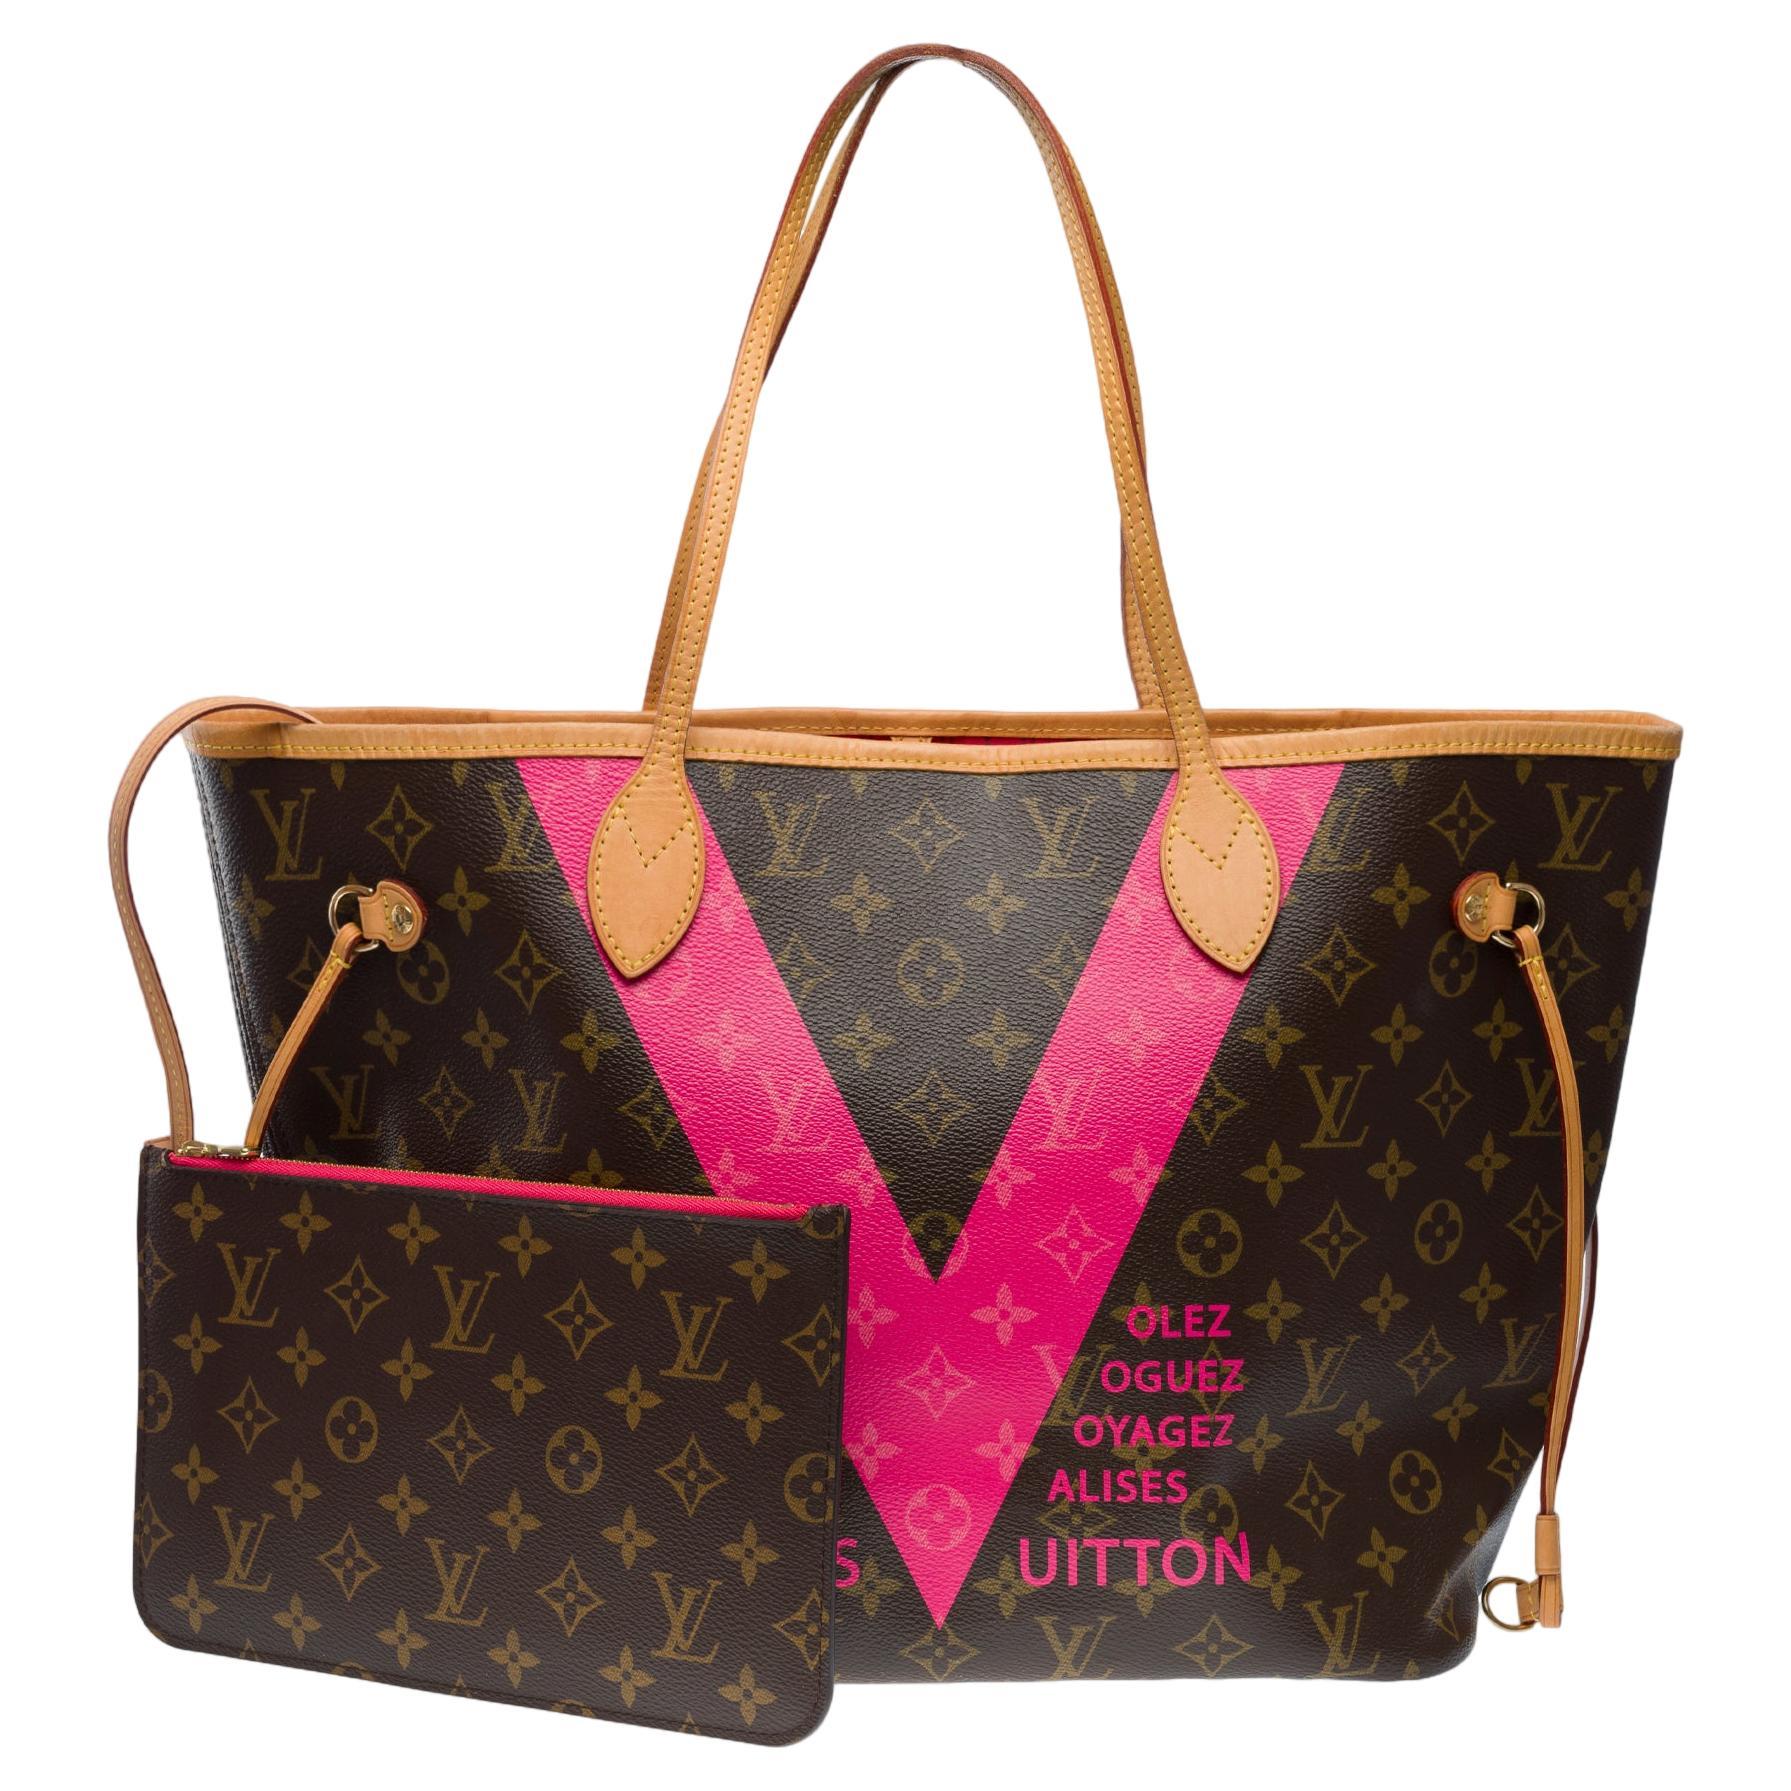 Does Louis Vuitton have limited edition bags?